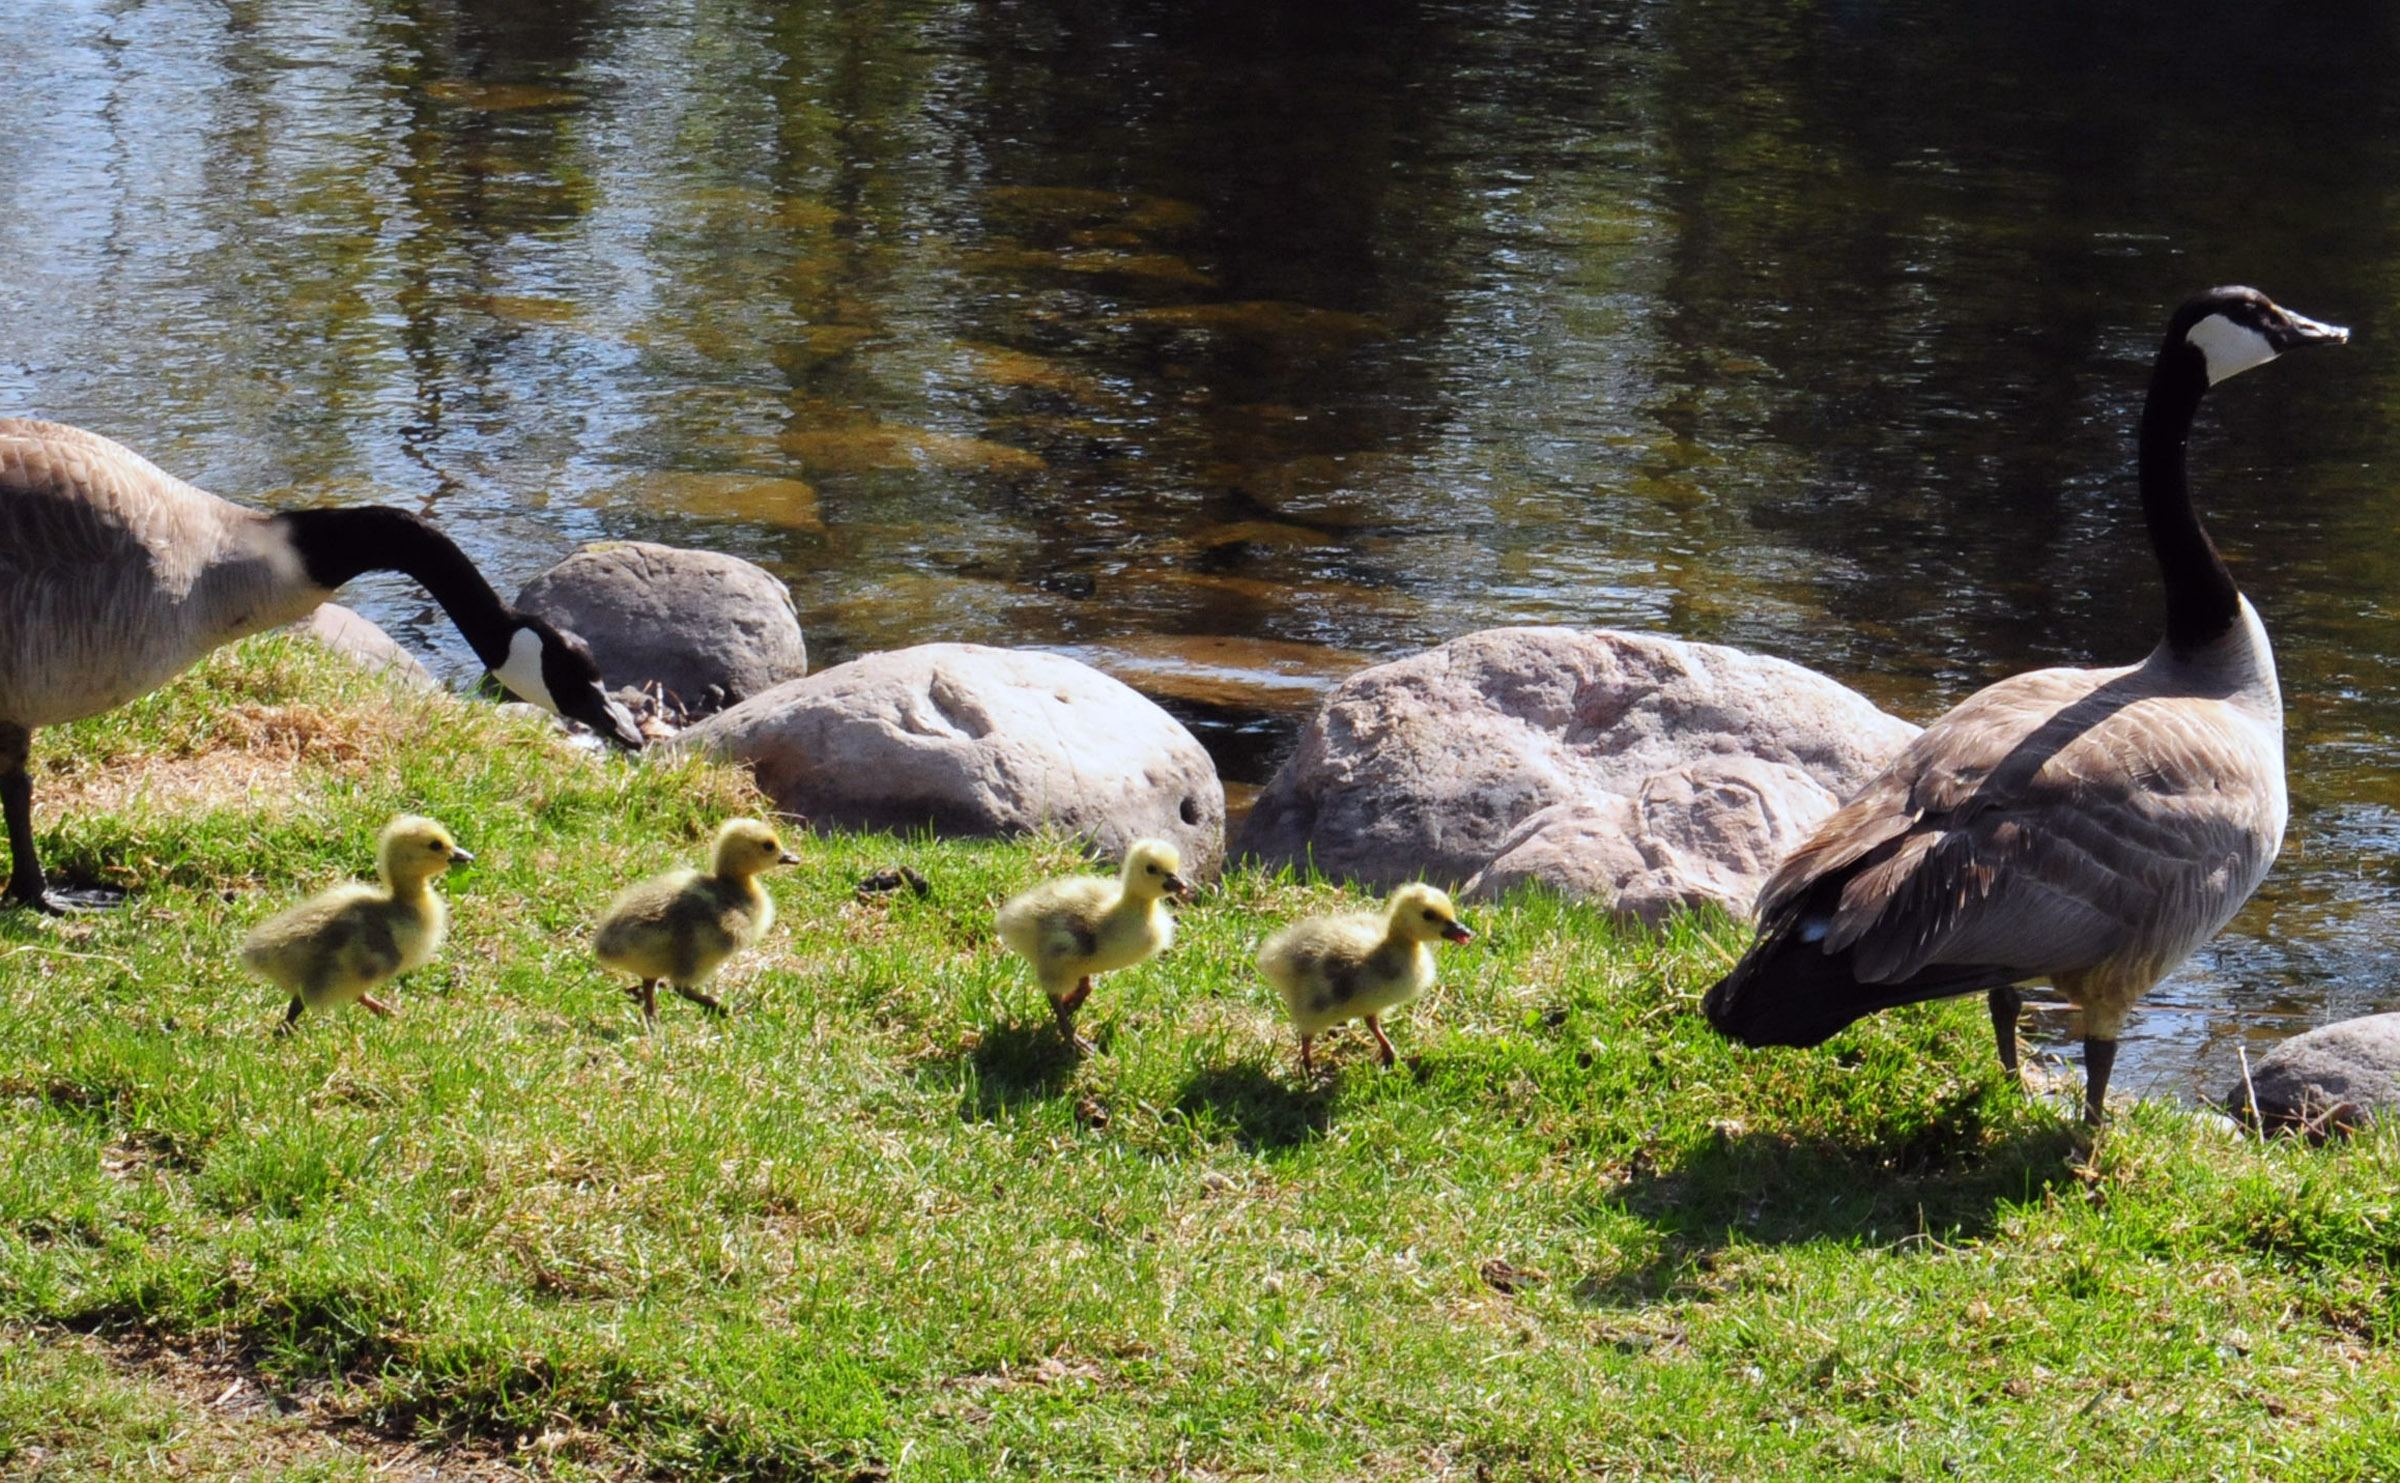 FLUFFY- Four ducklings wander around with their parents at Bower Ponds recently as they waddle and discover new things.